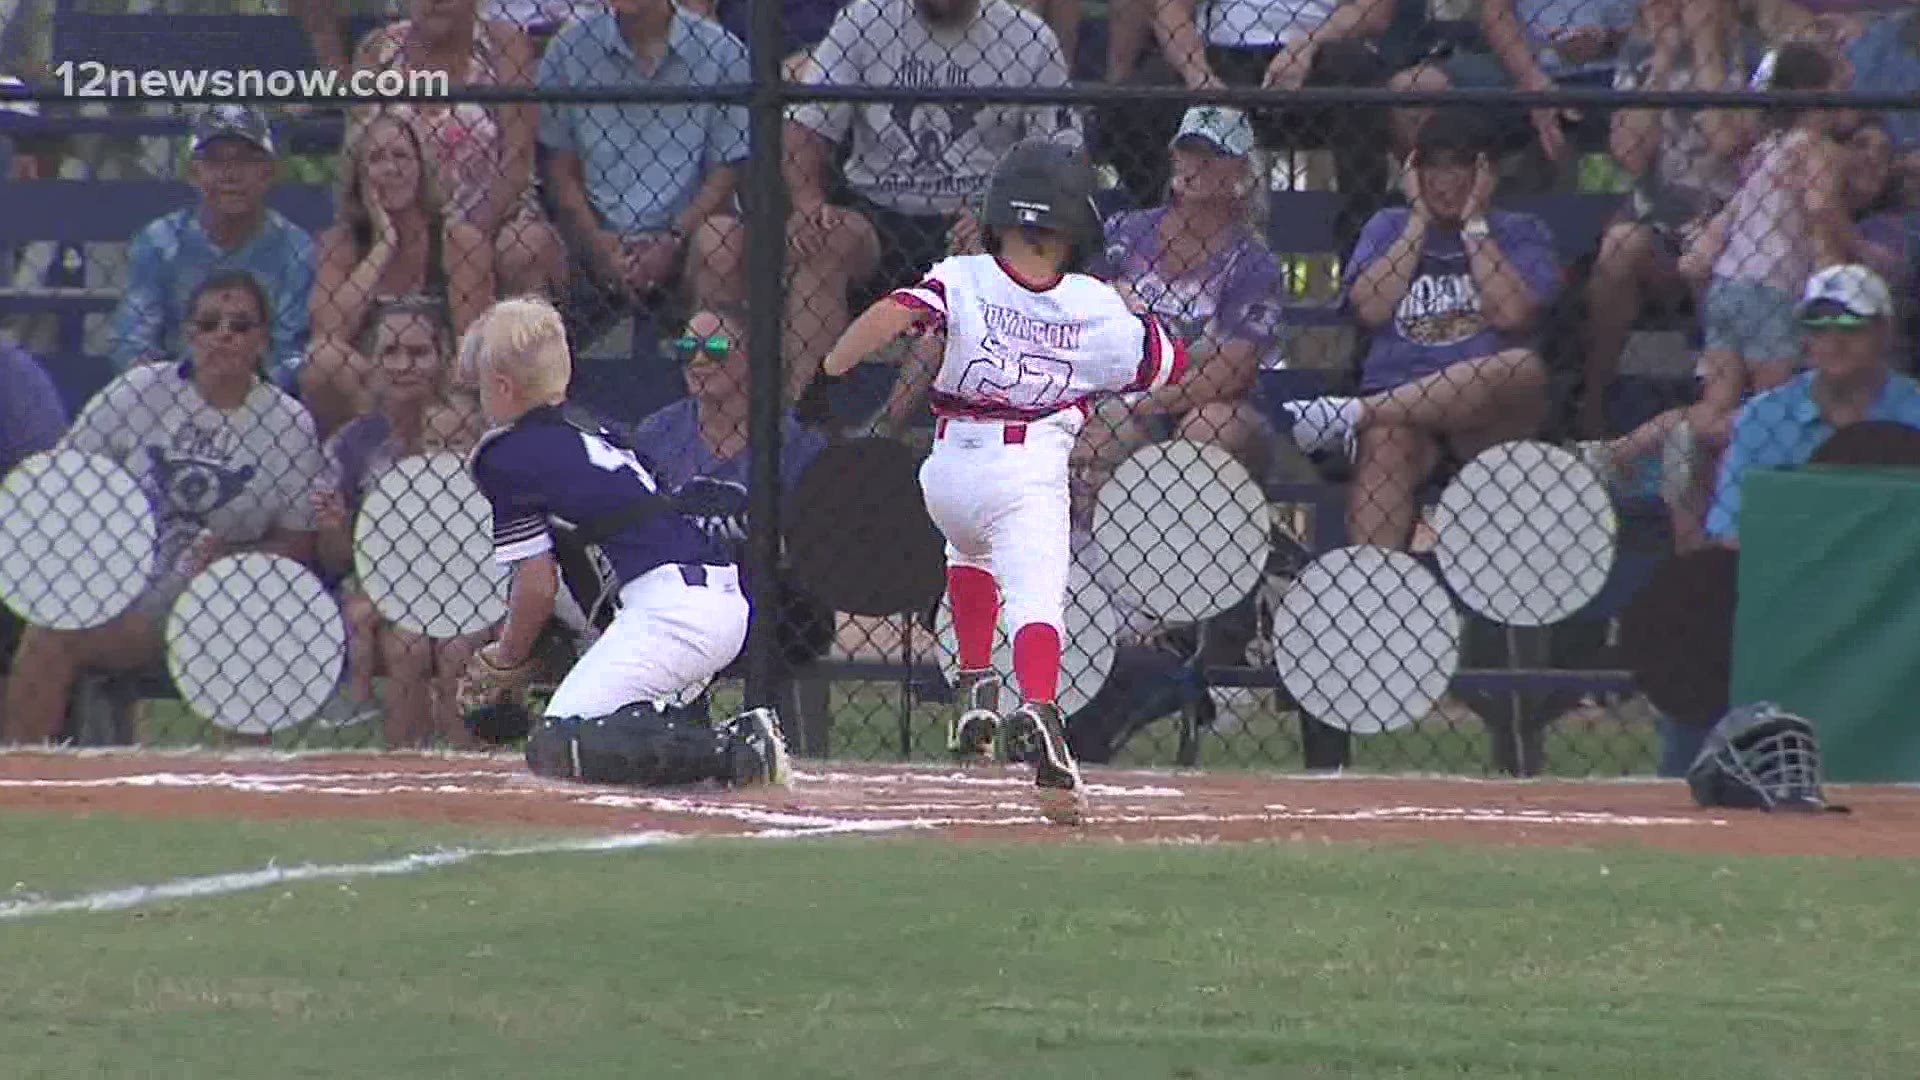 Bridge City clinches spot in District 32 Championship with win over Port Neches